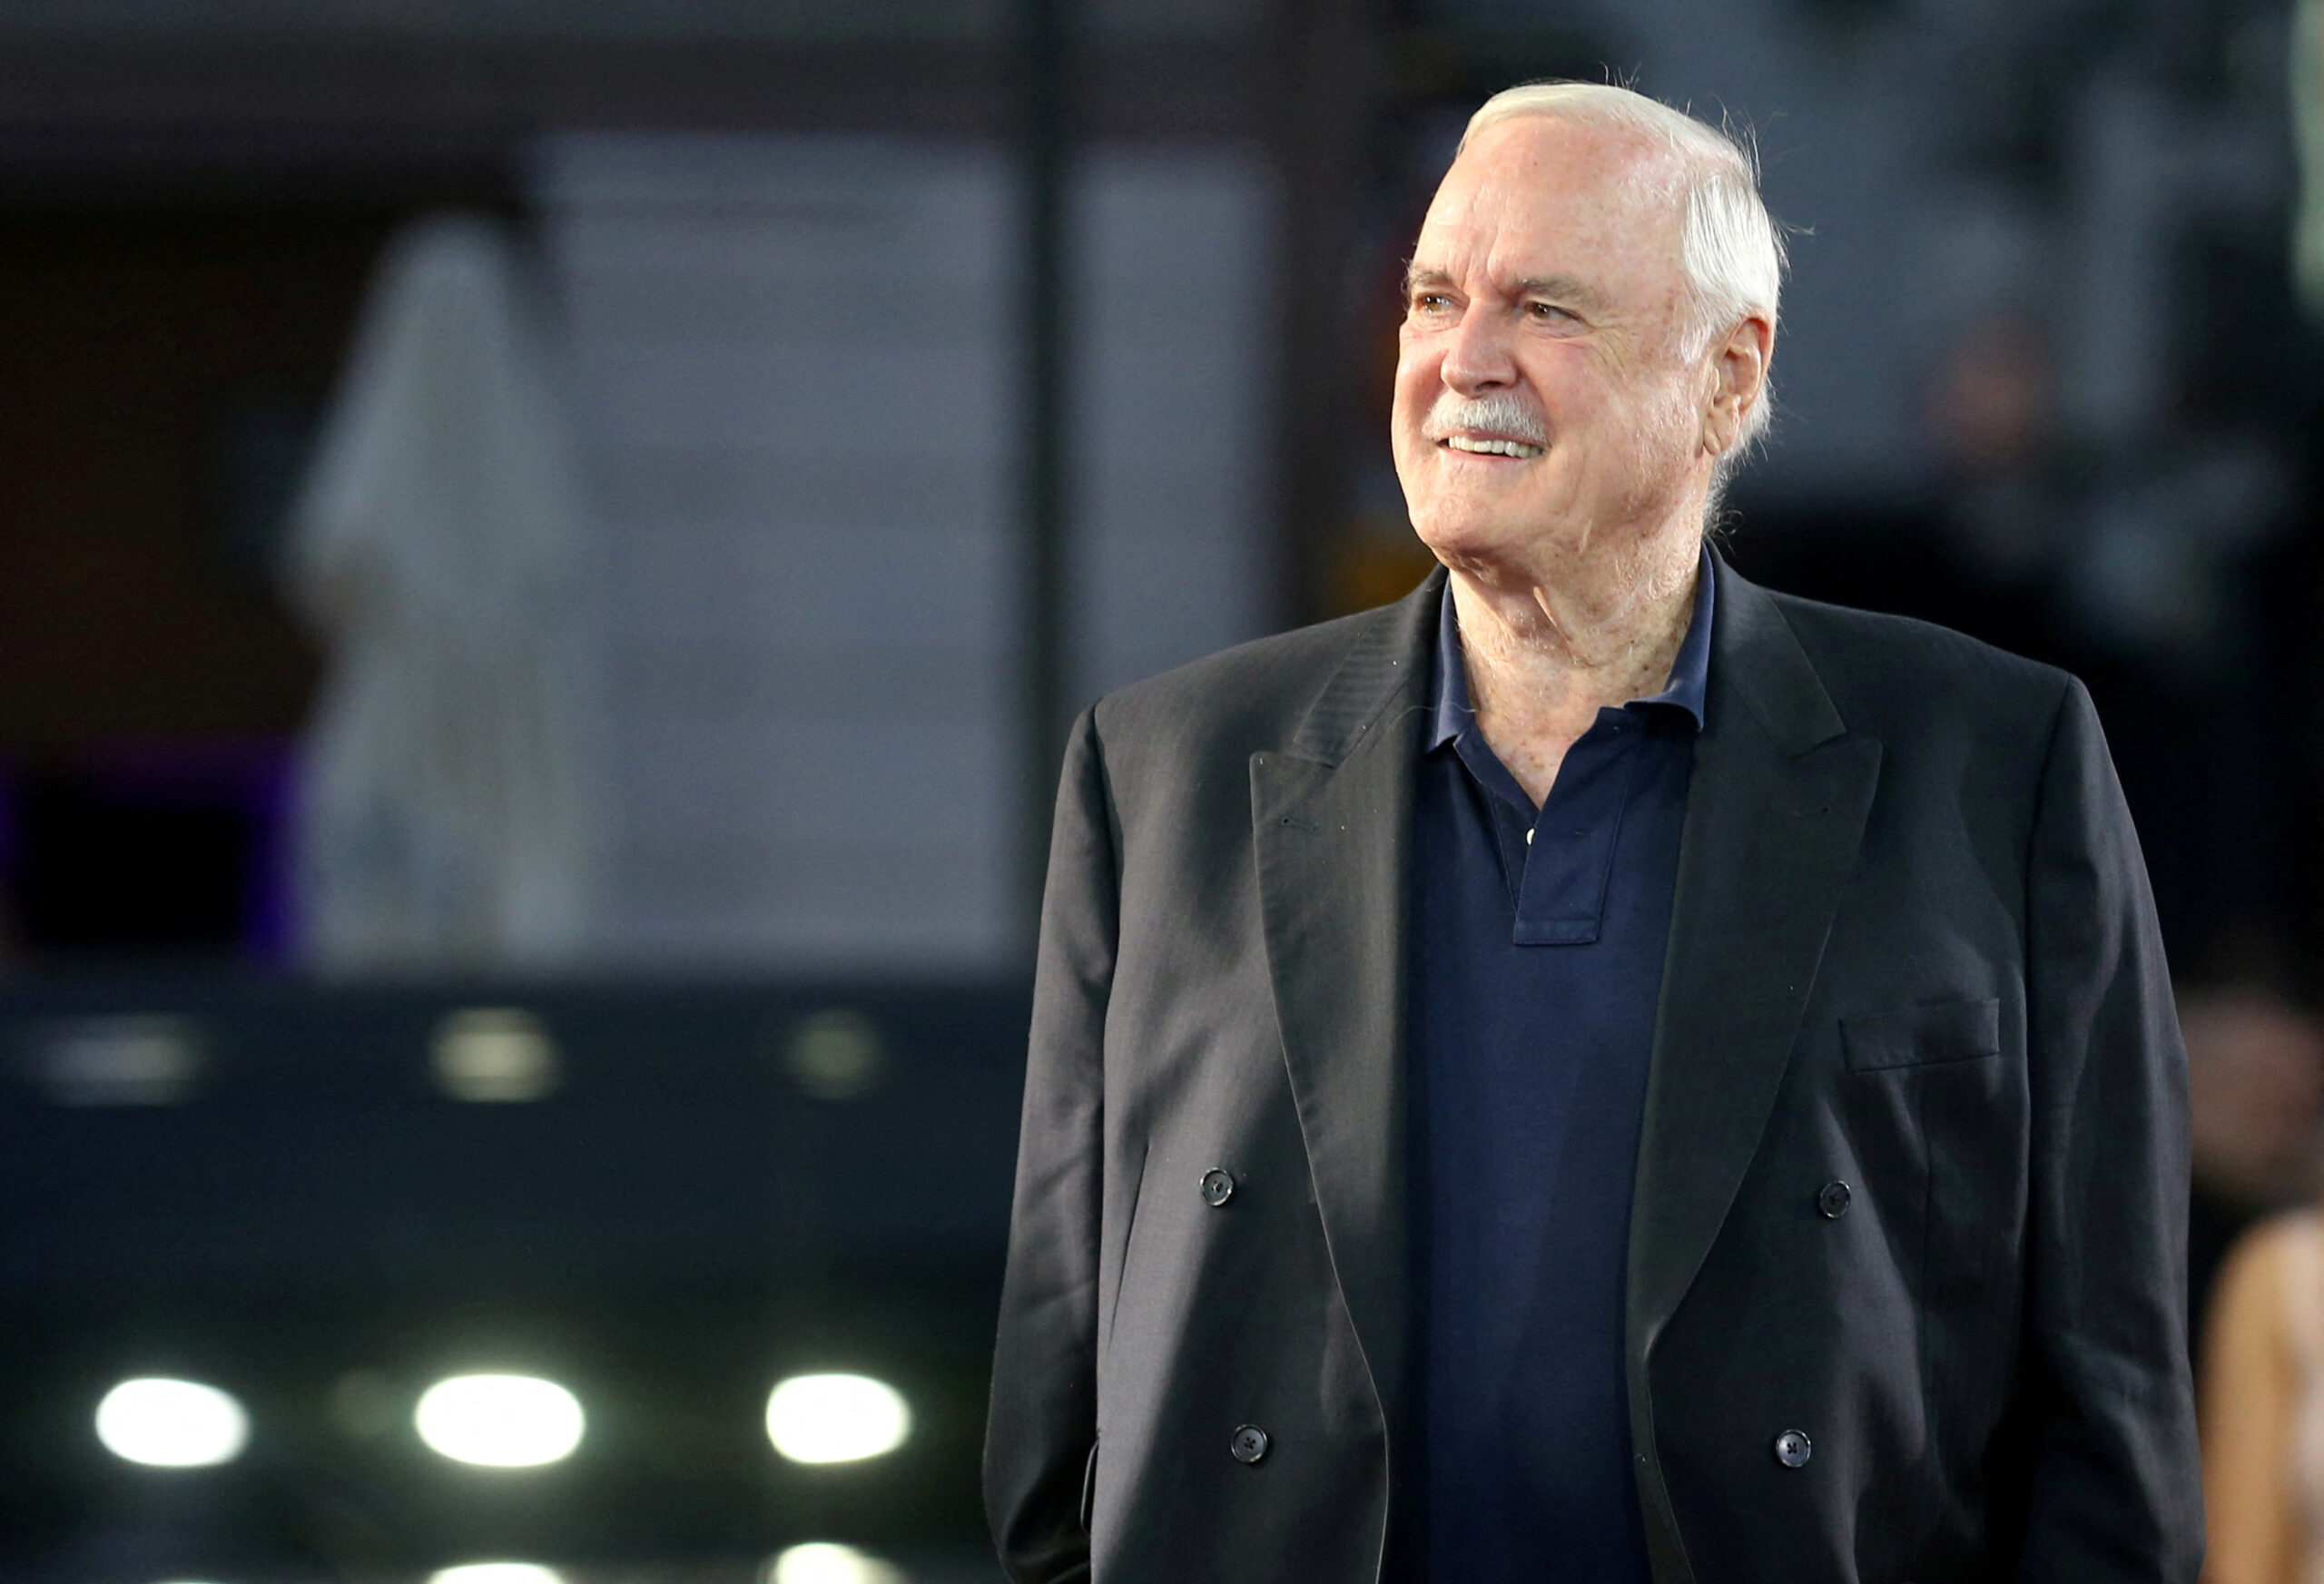 FILE PHOTO: British actor John Cleese walks on the red carpet during the 23rd Sarajevo Film Festival in Sarajevo, Bosnia and Herzegovina, August 16, 2017. REUTERS/Dado Ruvic/File Photo Photo: DADO RUVIC/REUTERS